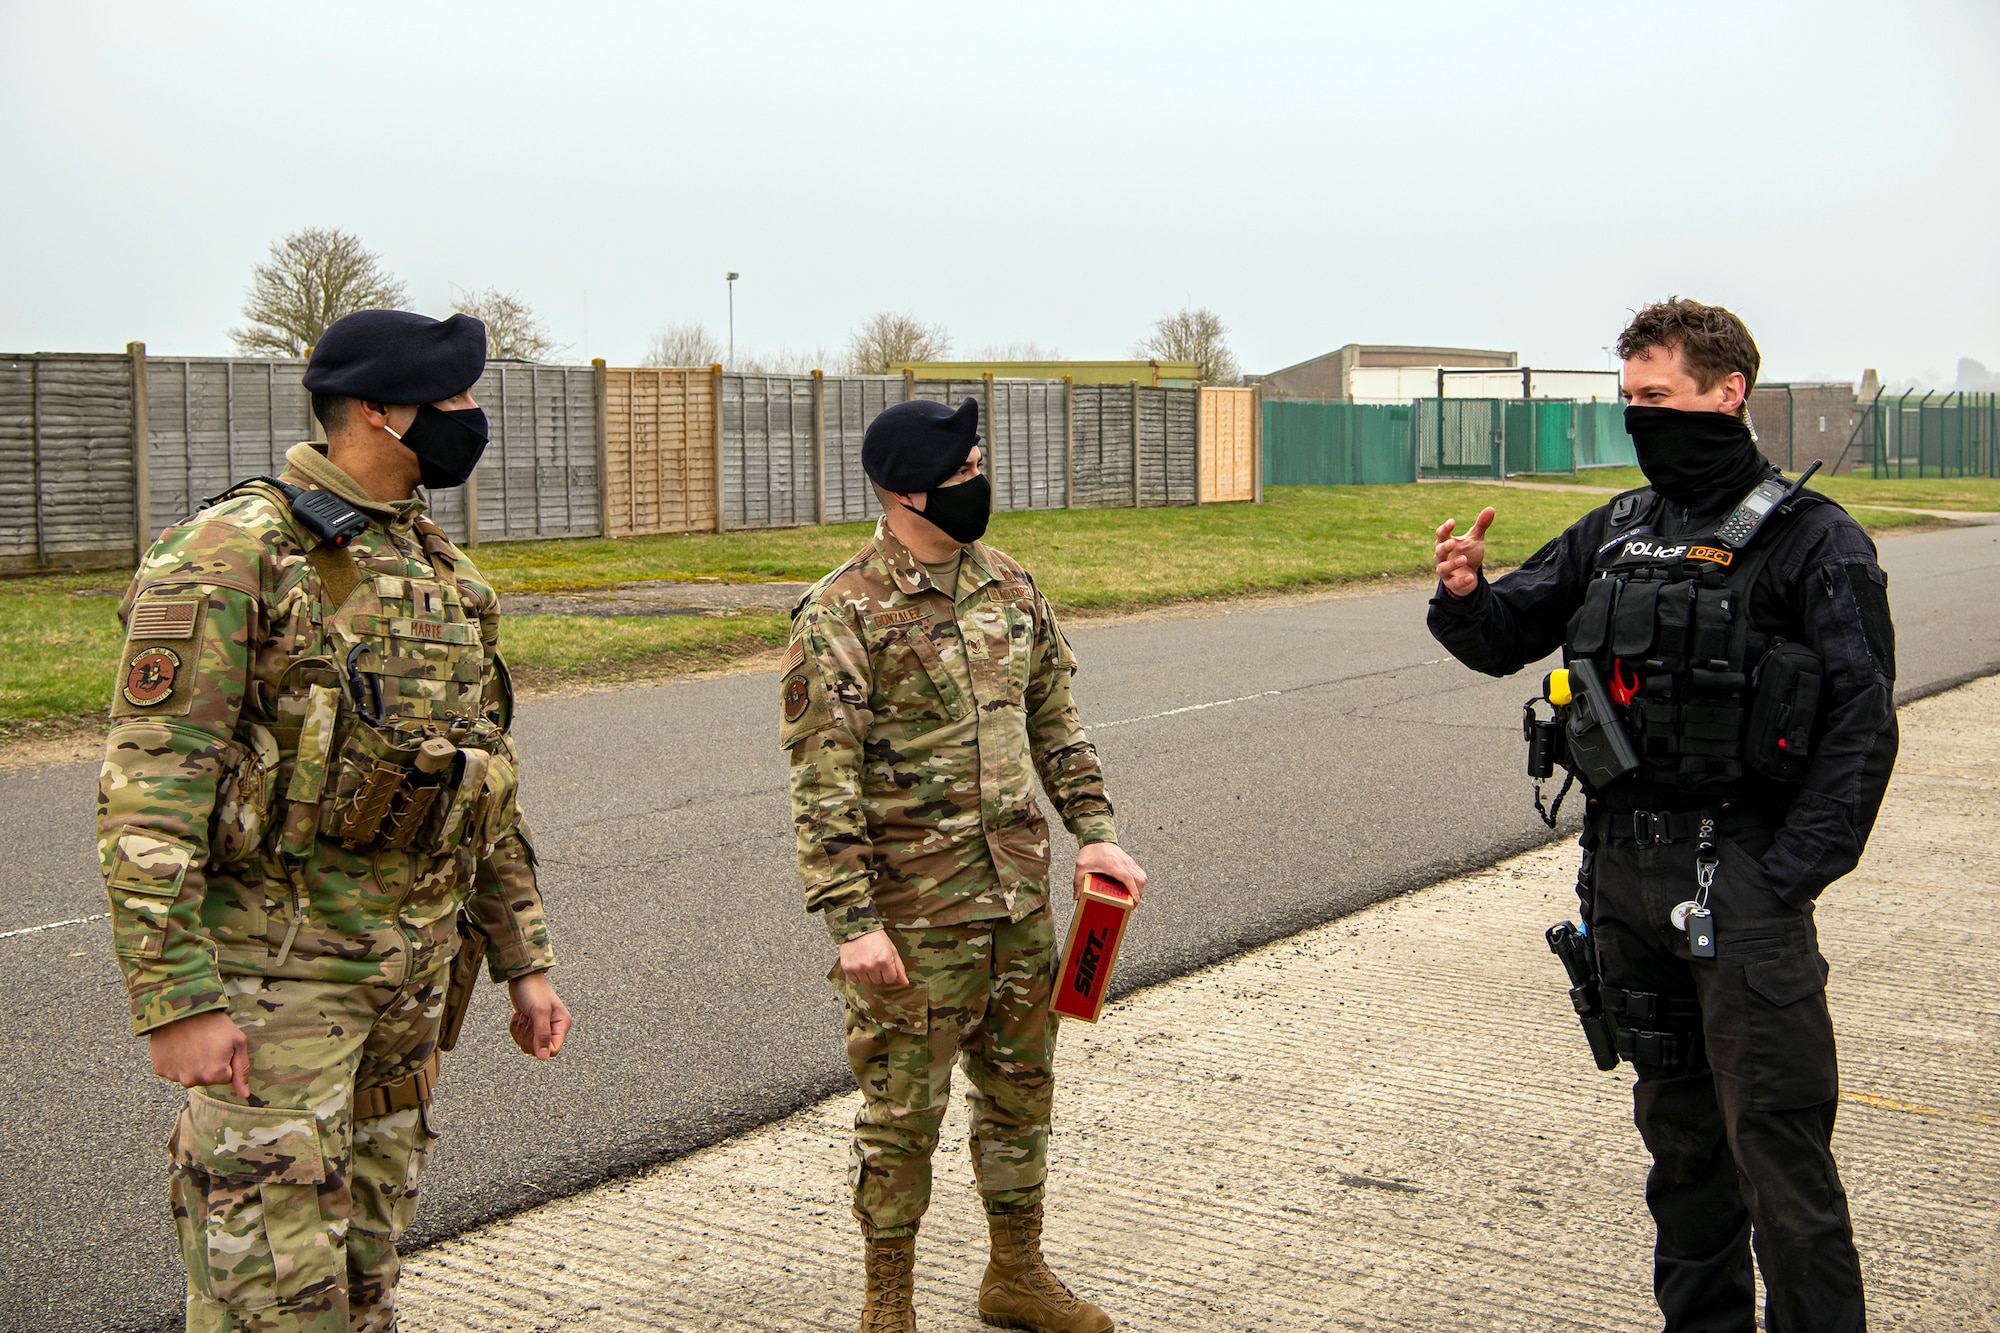 A policeman from the Northamptonshire Police Department, speaks with 1st Lt. George Marte, left, 422d Security Forces Squadron operations officer, and Staff Sgt. Alvaro Gonzalez, 422d SFS unit trainer, after a field training exercise at RAF Croughton, England, Mar. 3, 2021.  The NHPD utilized the 422d SFS training complex to help strengthen their tactics and techniques. Events like this help strengthen the local partnership between the 422d SFS and the NHPD. (U.S. Air Force photo by Senior Airman Eugene Oliver)